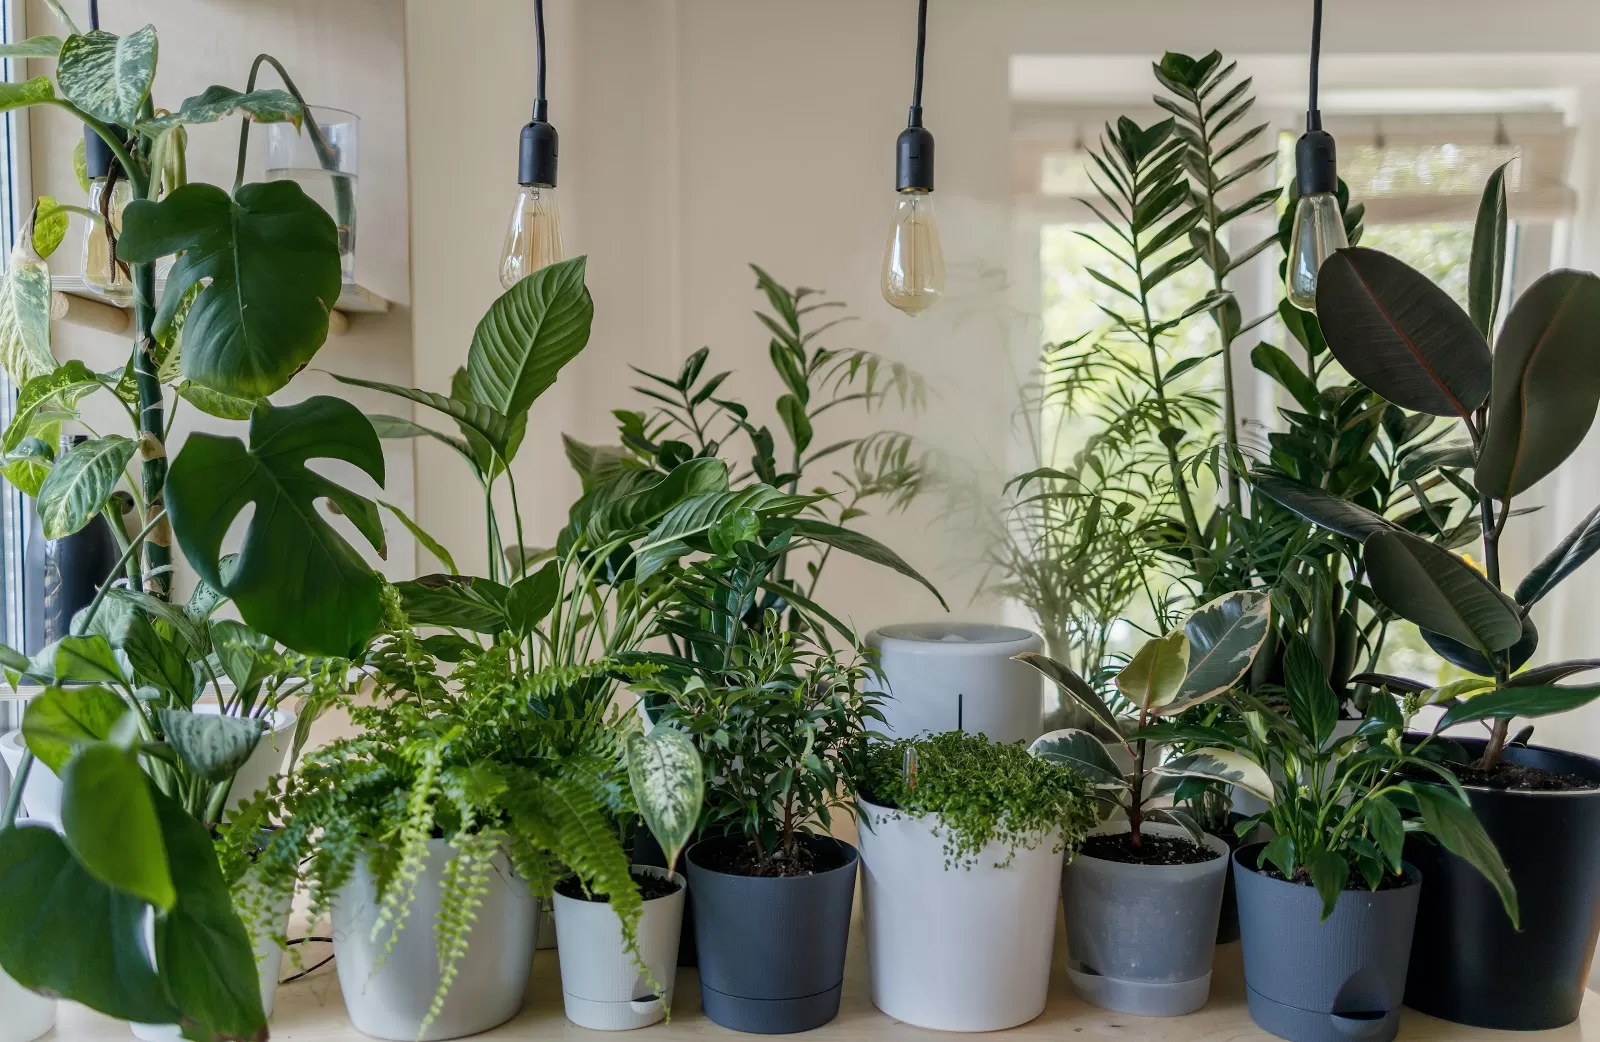 Plants in an air conditioned room